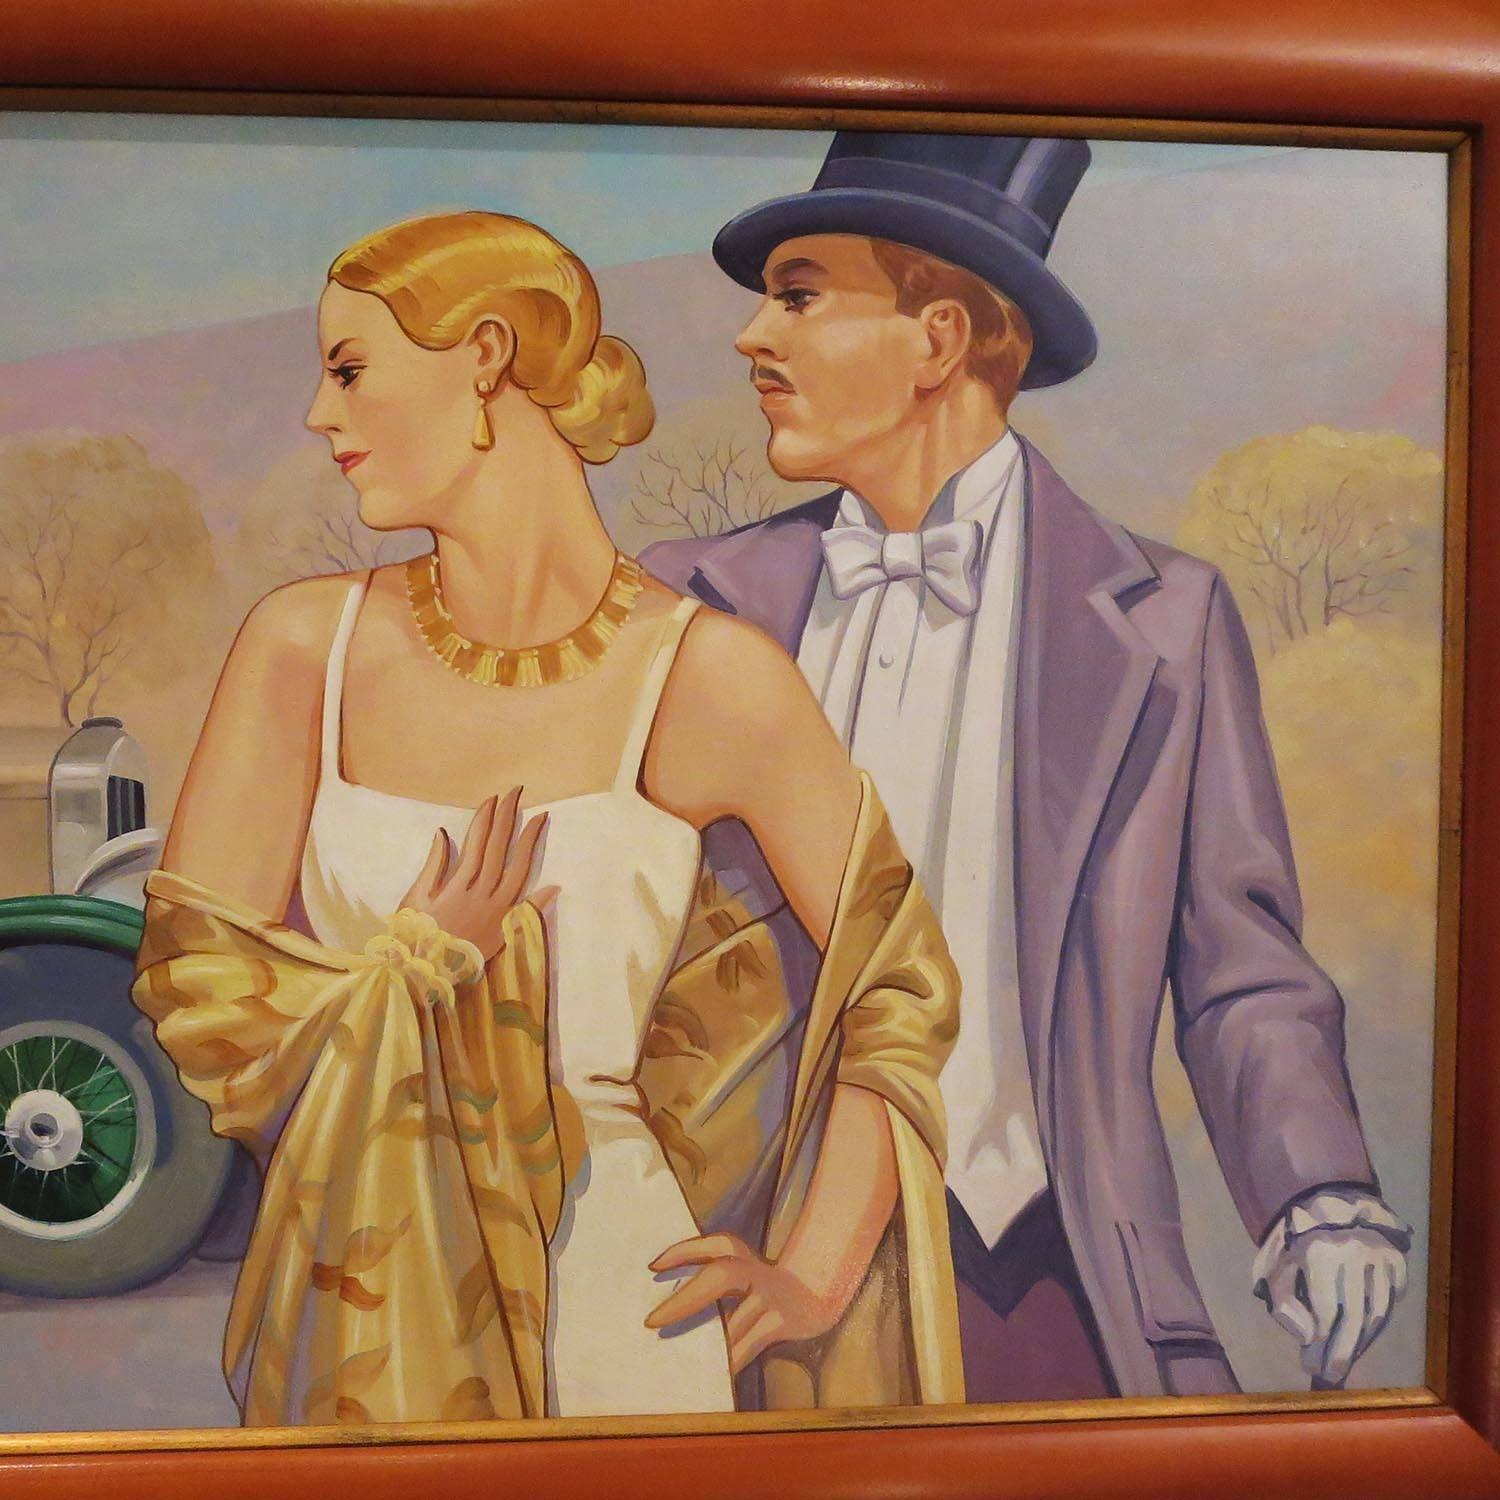 This great painting was commissioned as part of a series of Art Deco inspired transportation themed works. They were created for the executive offices of Bob's Big Boy restaurants in the 1970s. The work, executed in oil on board, is in the style of